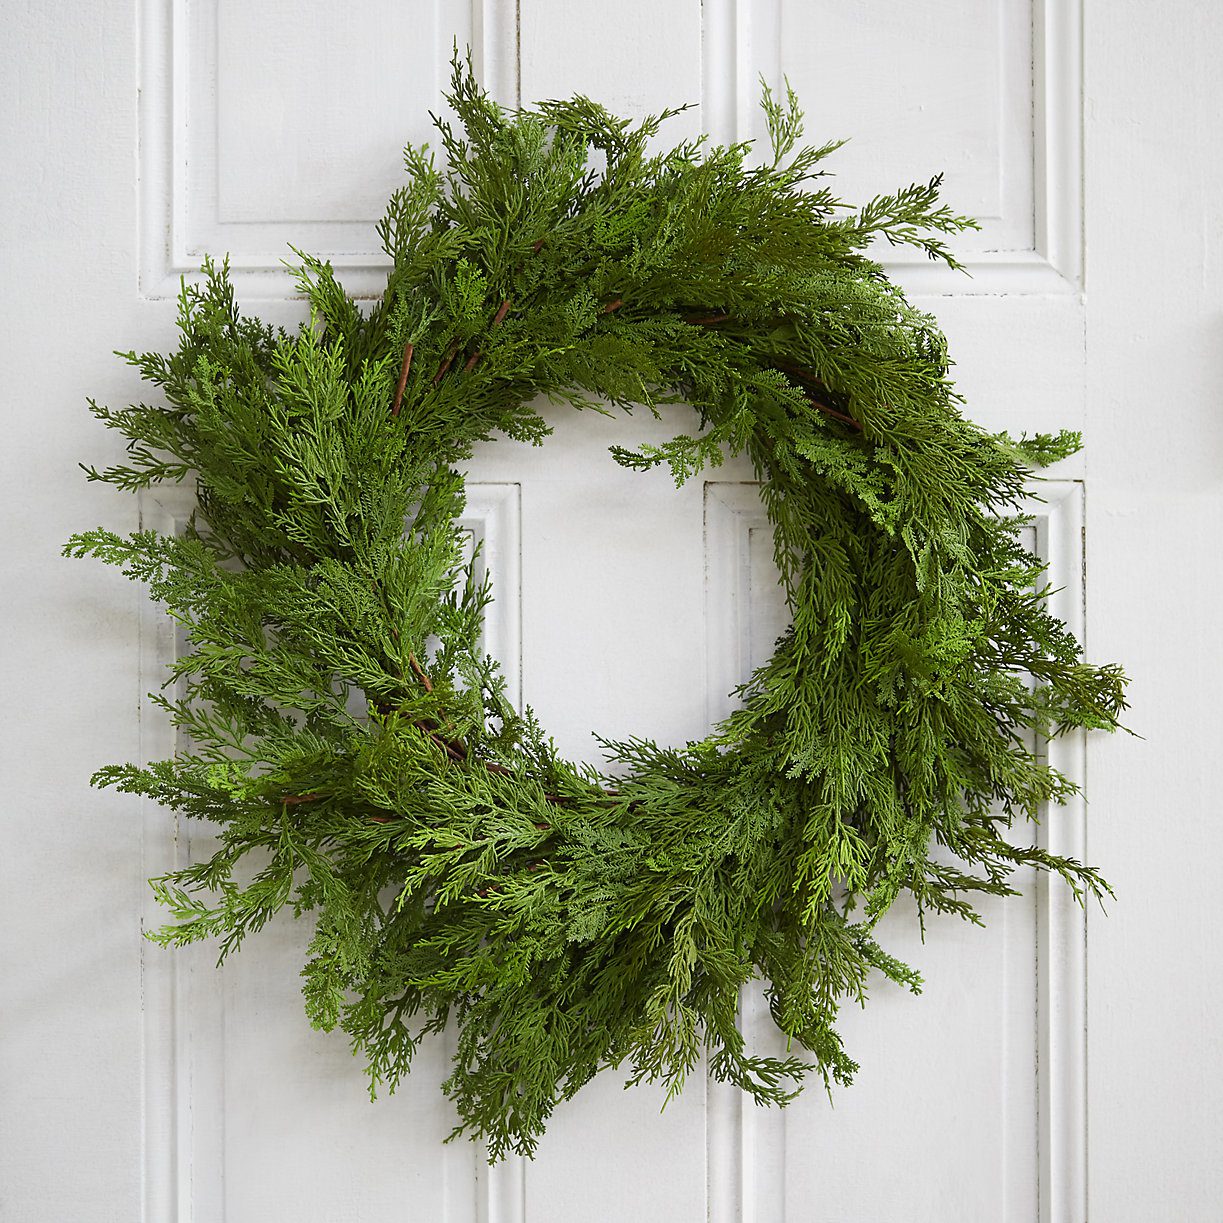 Front Door Holiday Decor Items I Love | Wit & Delight